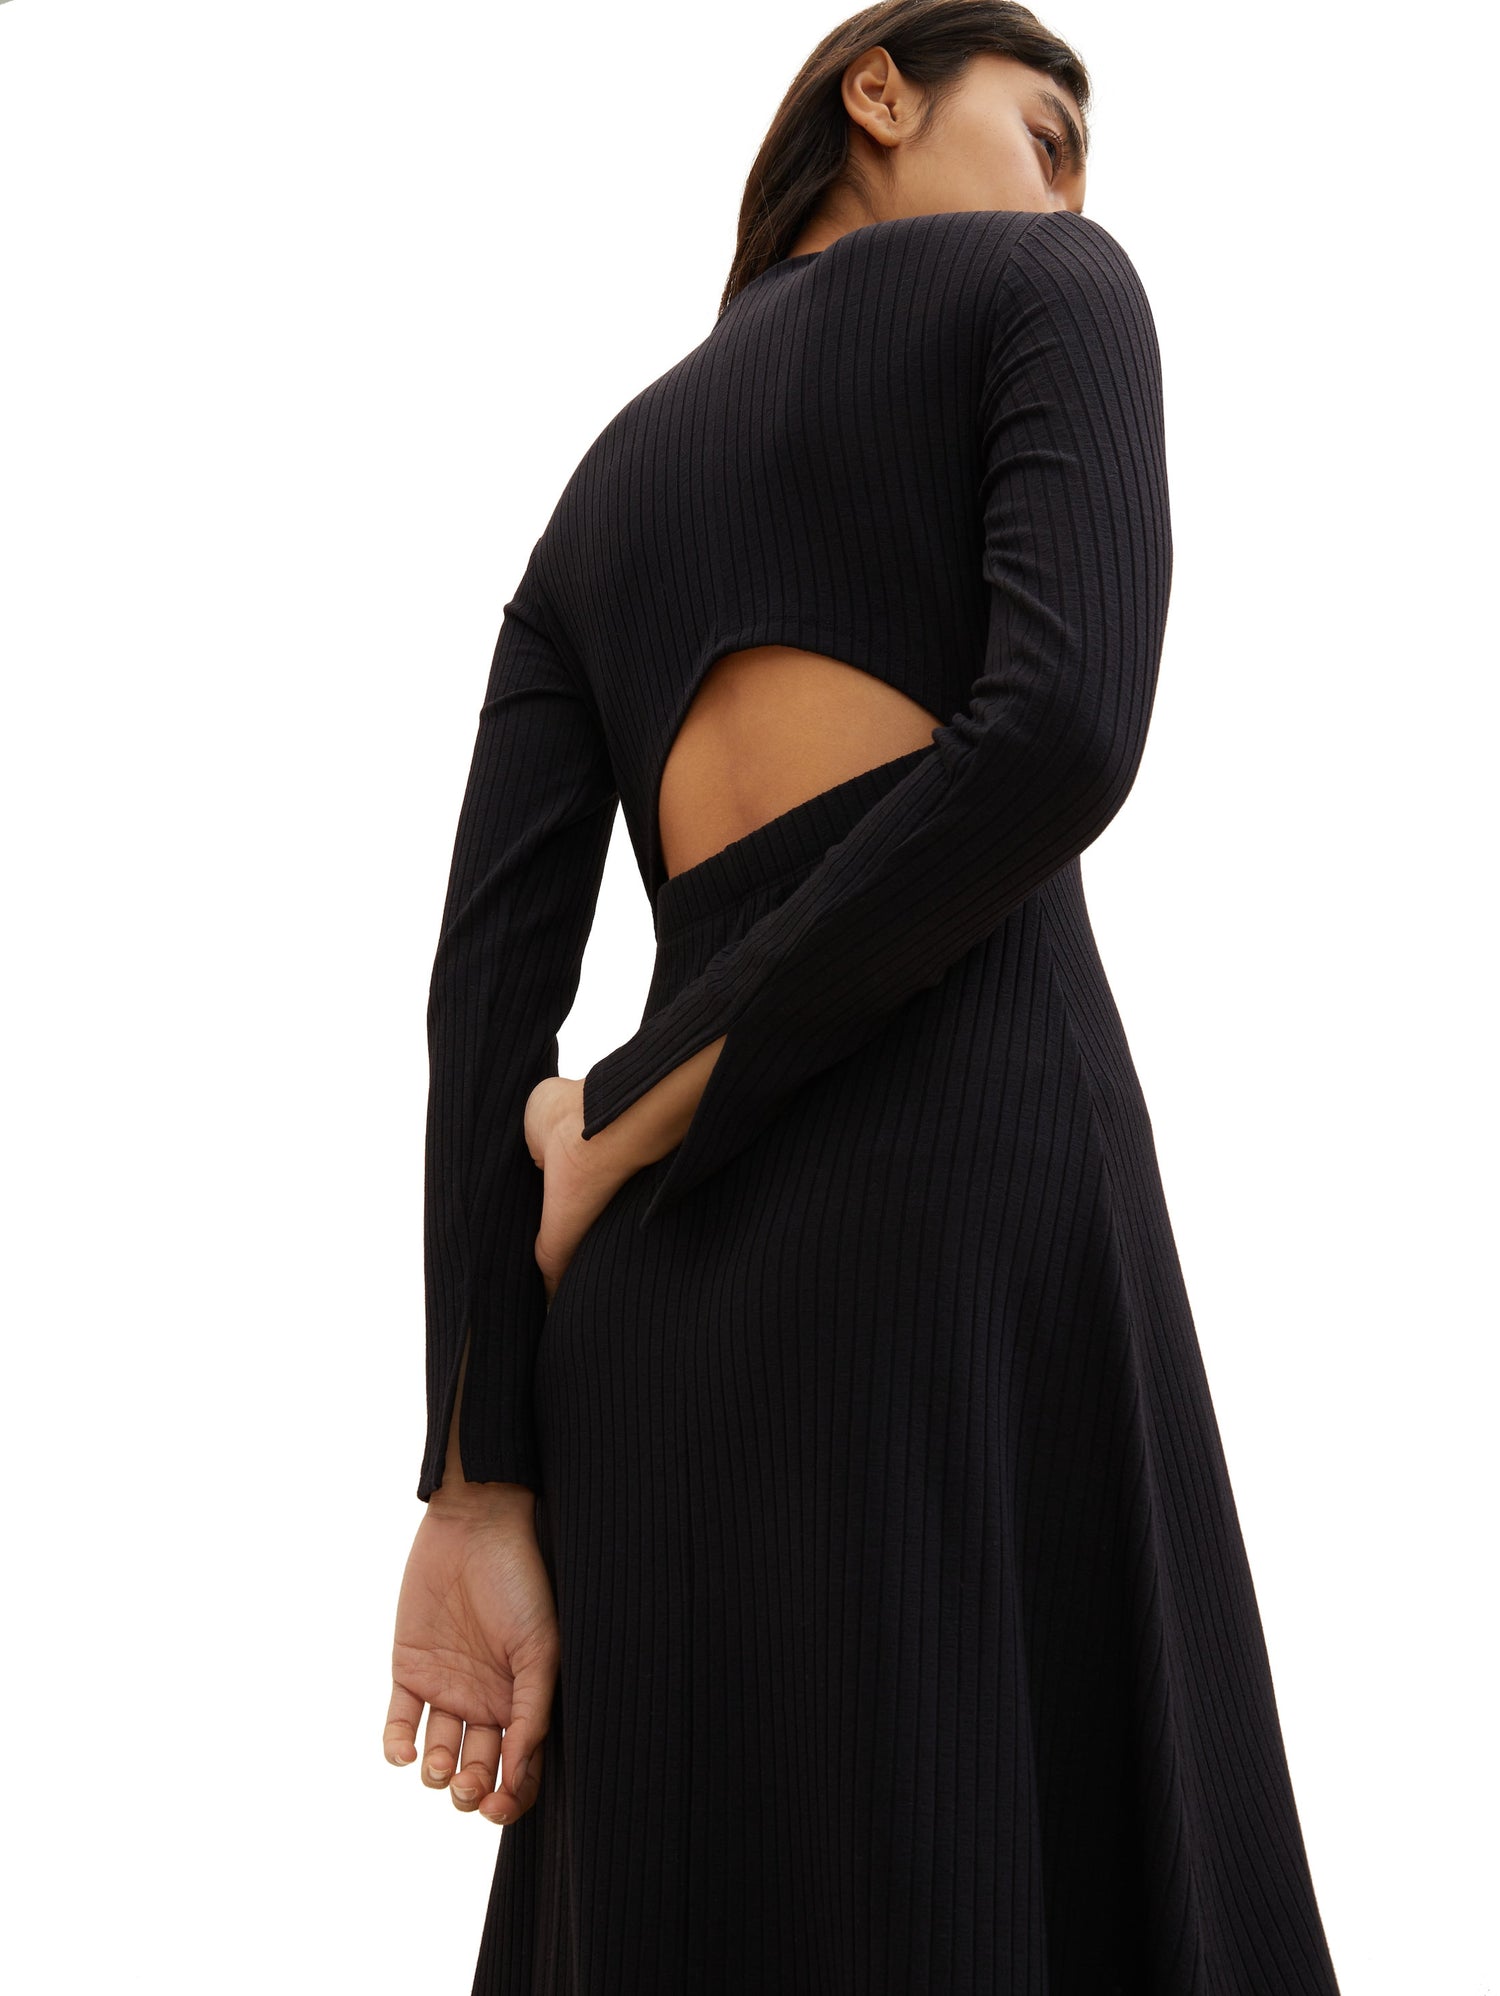 Long Sleeve Midi Dress With Back Cut Out_1038140_14482_06